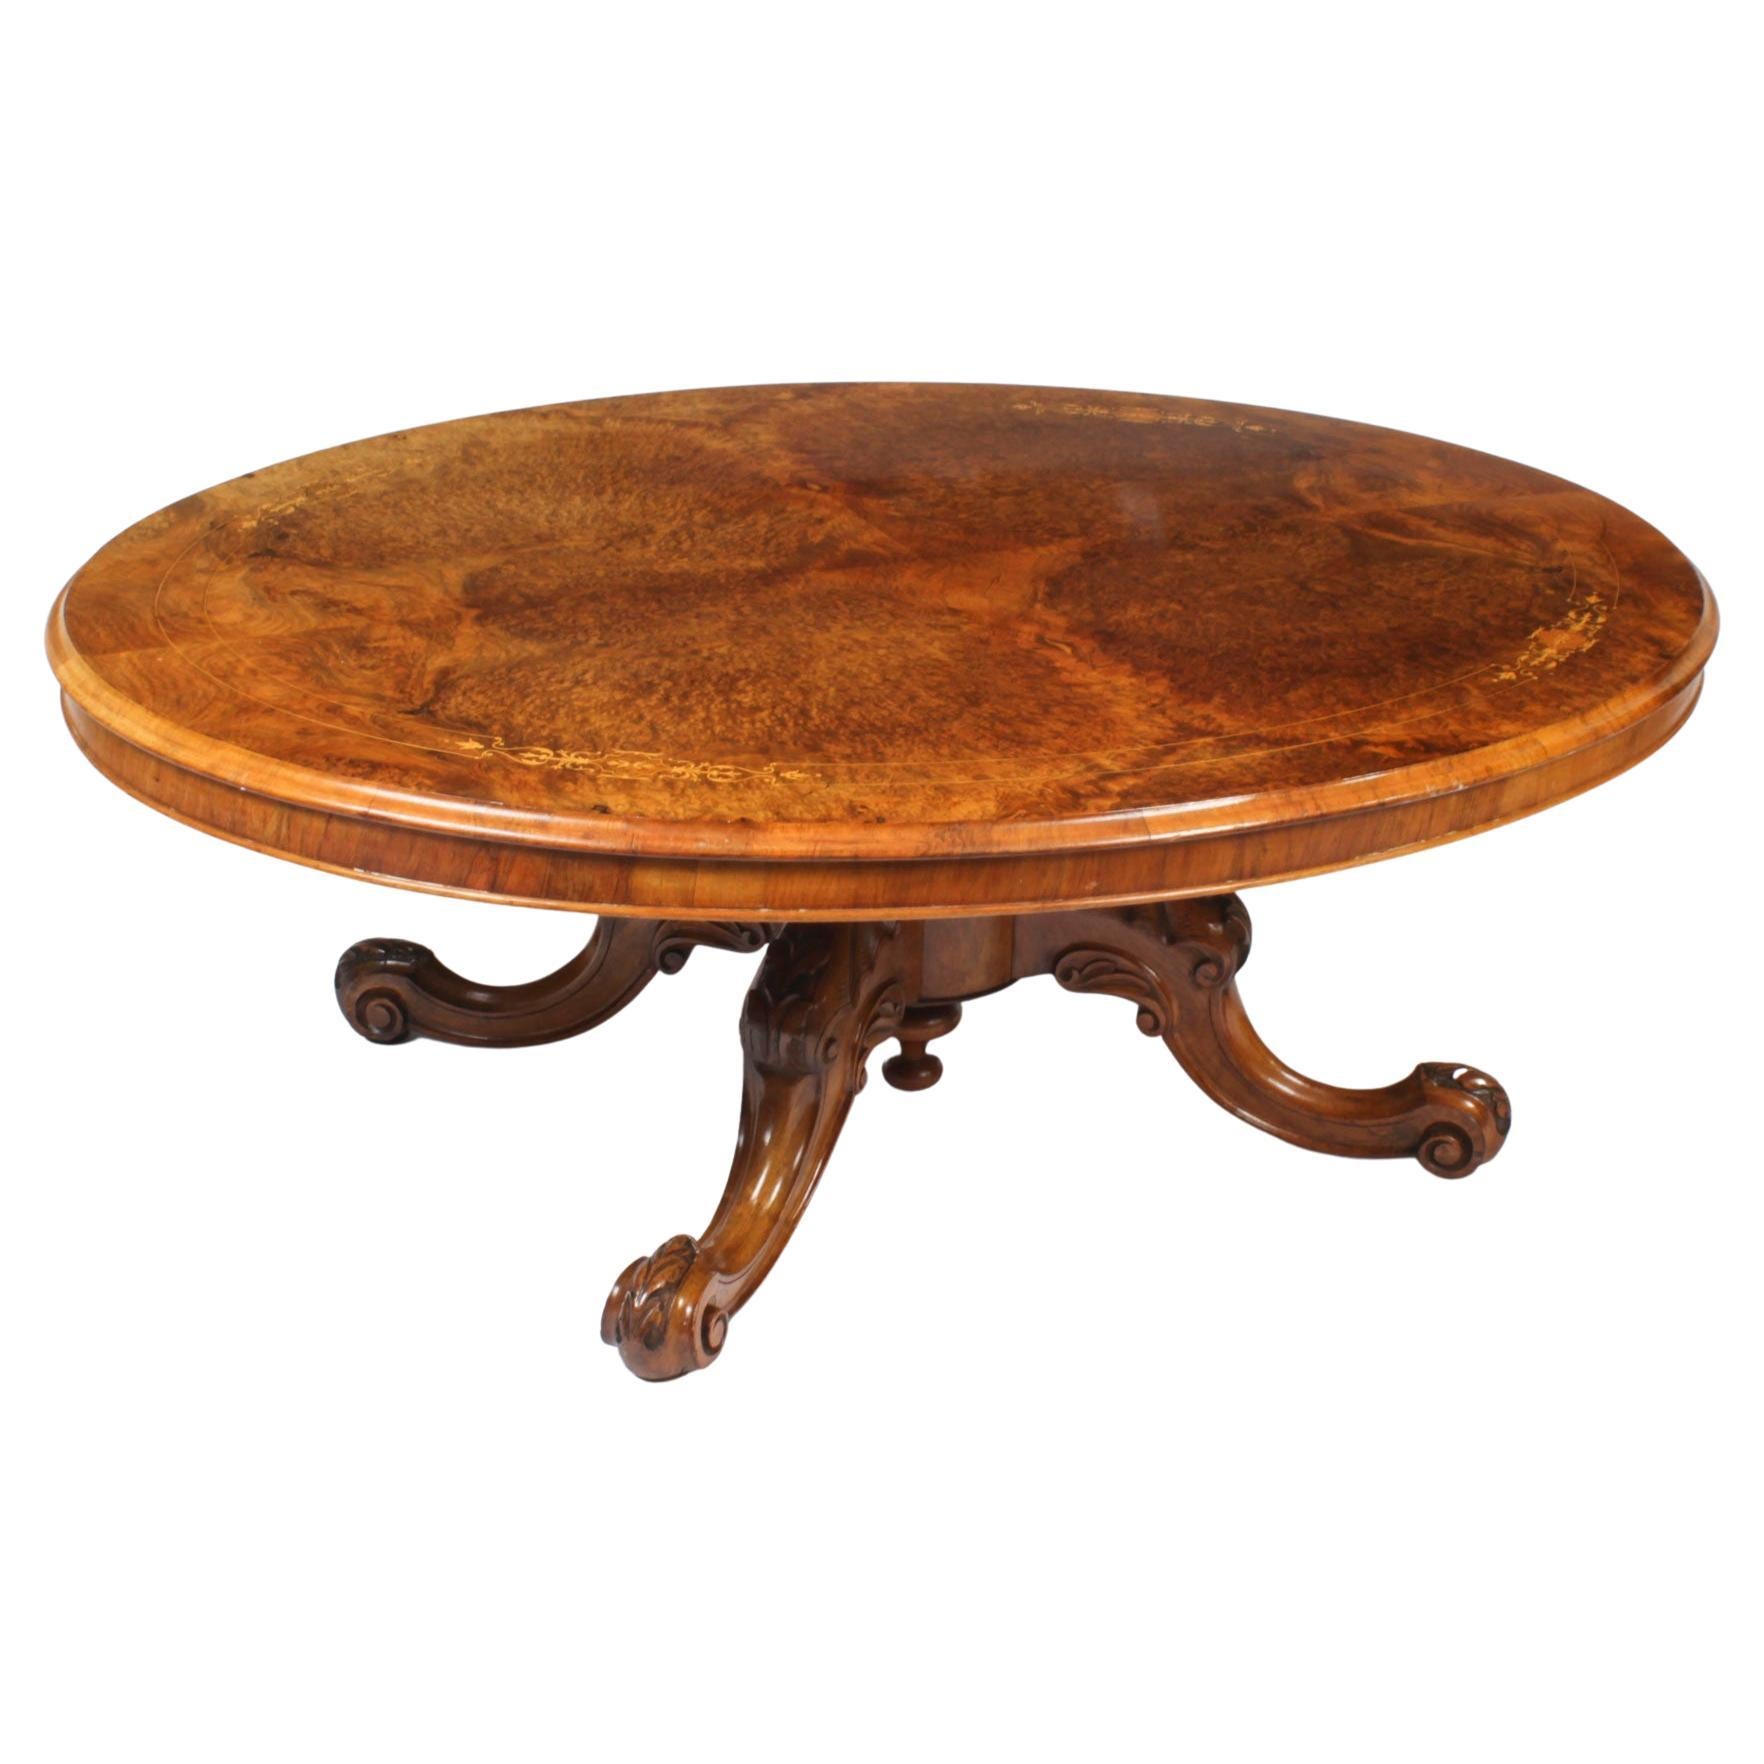 Antique Burr Walnut & Marquetry Oval Coffee Table Circa 19th Century For Sale